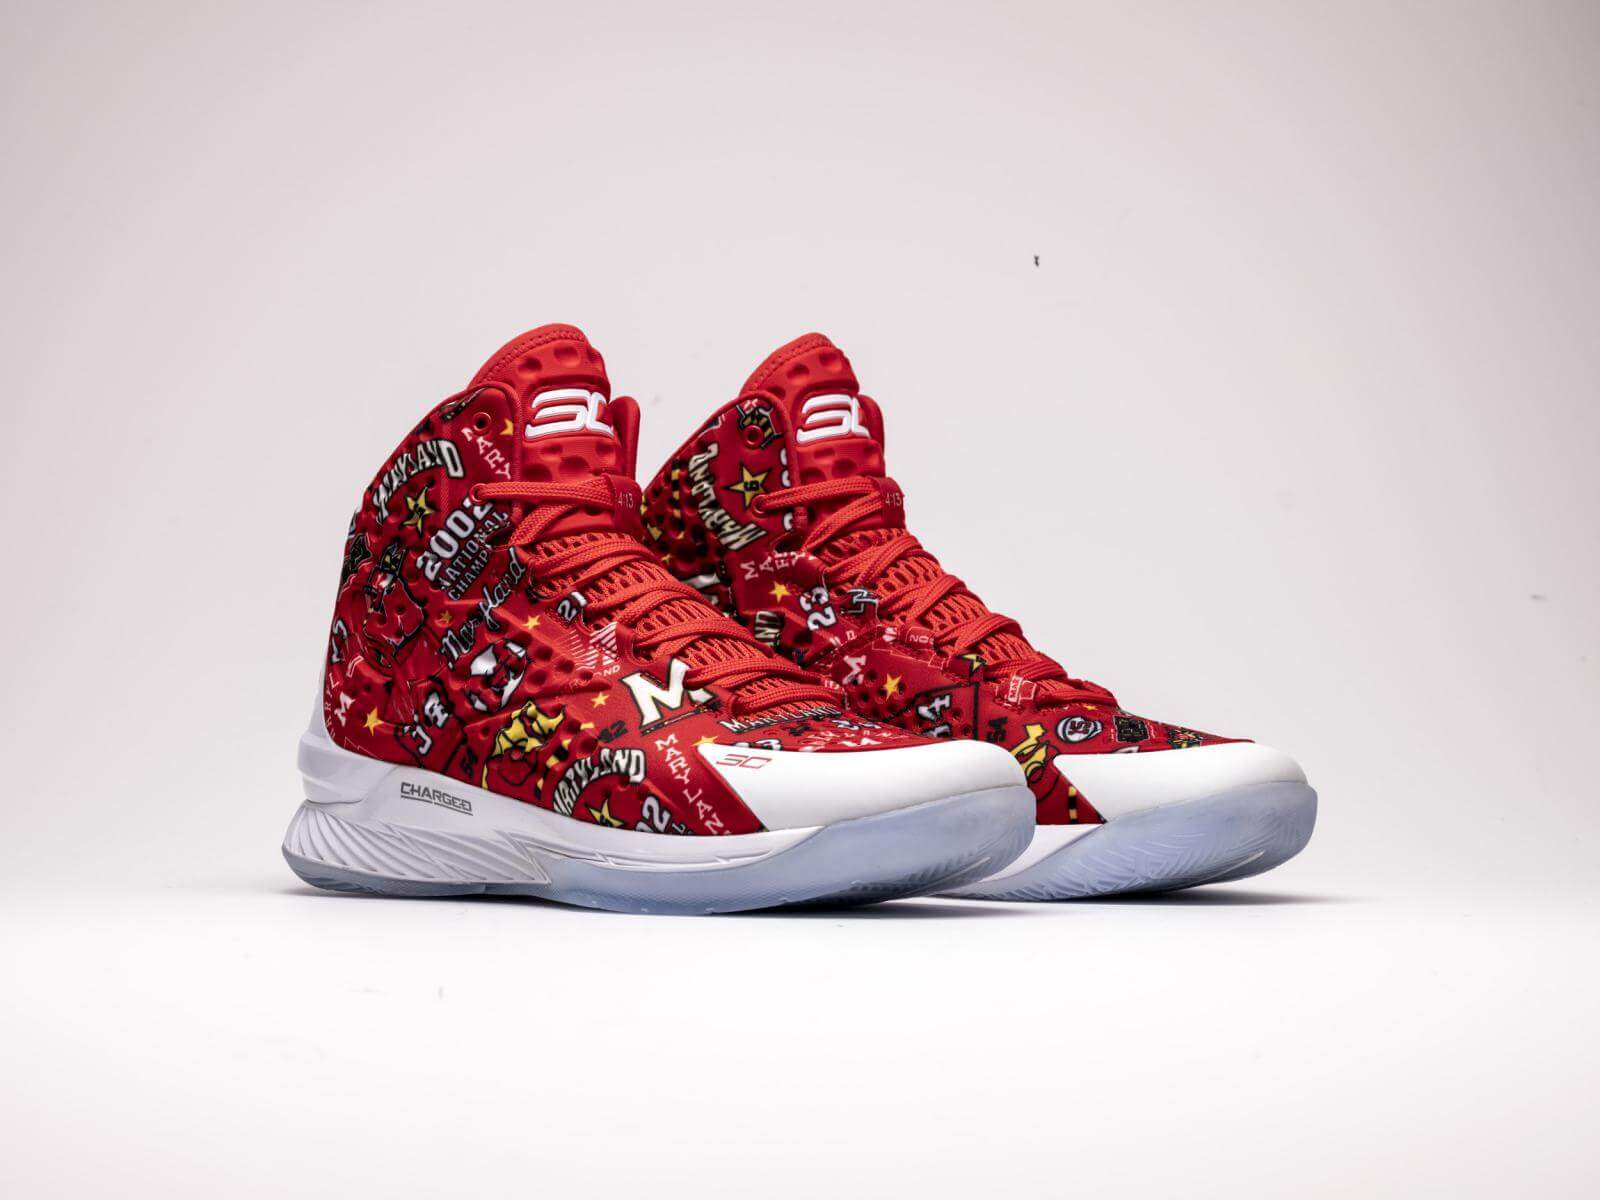 under armour icon basketball shoes